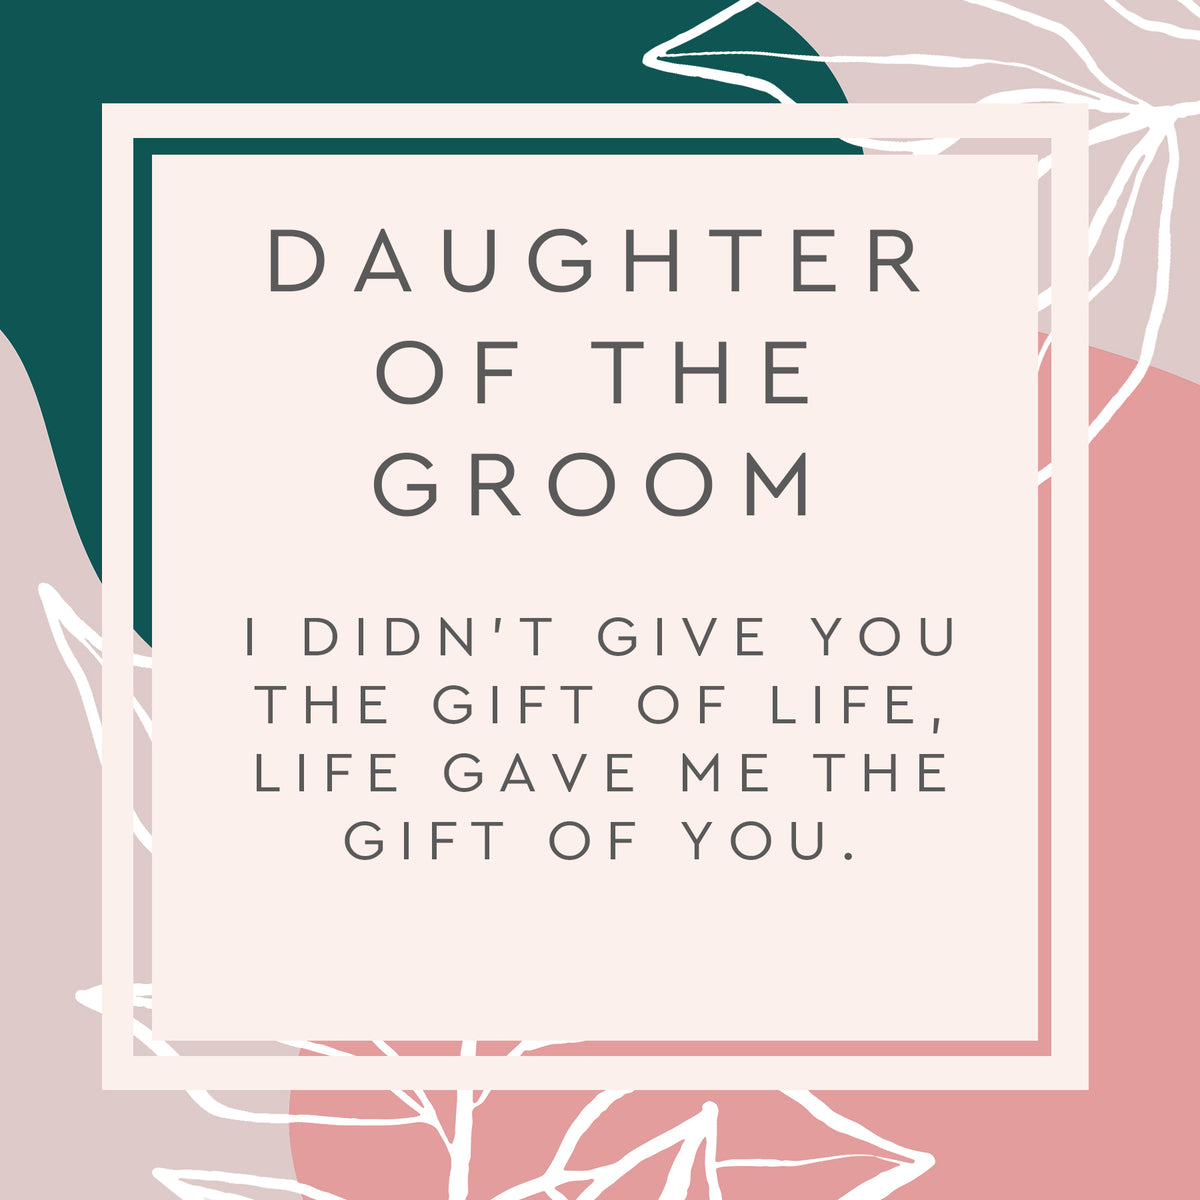 Daughter of the Groom Spa Gift Box